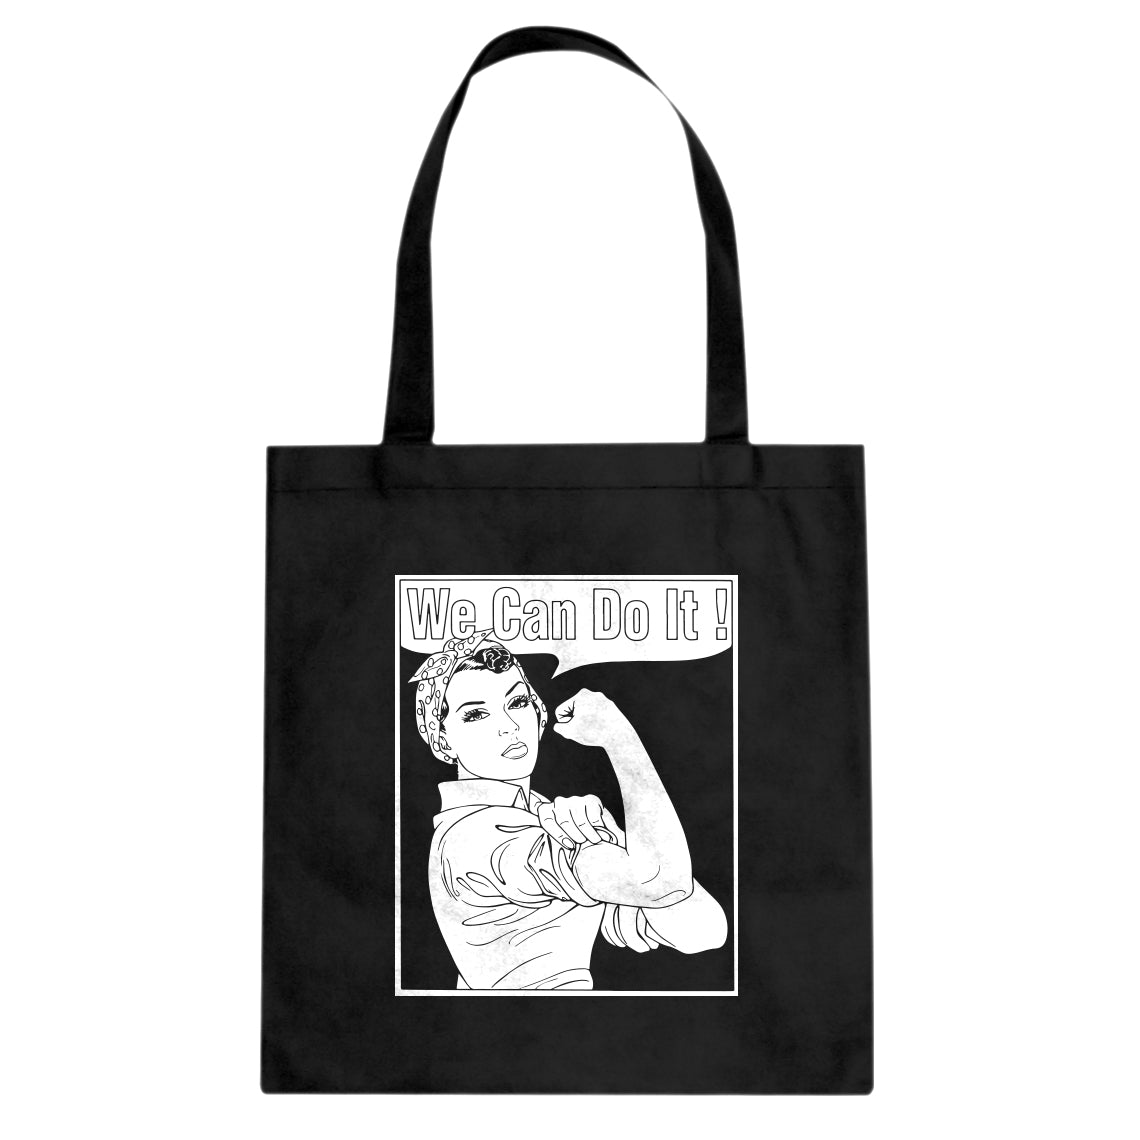 Tote Rosie the Riveter Canvas Tote Bag